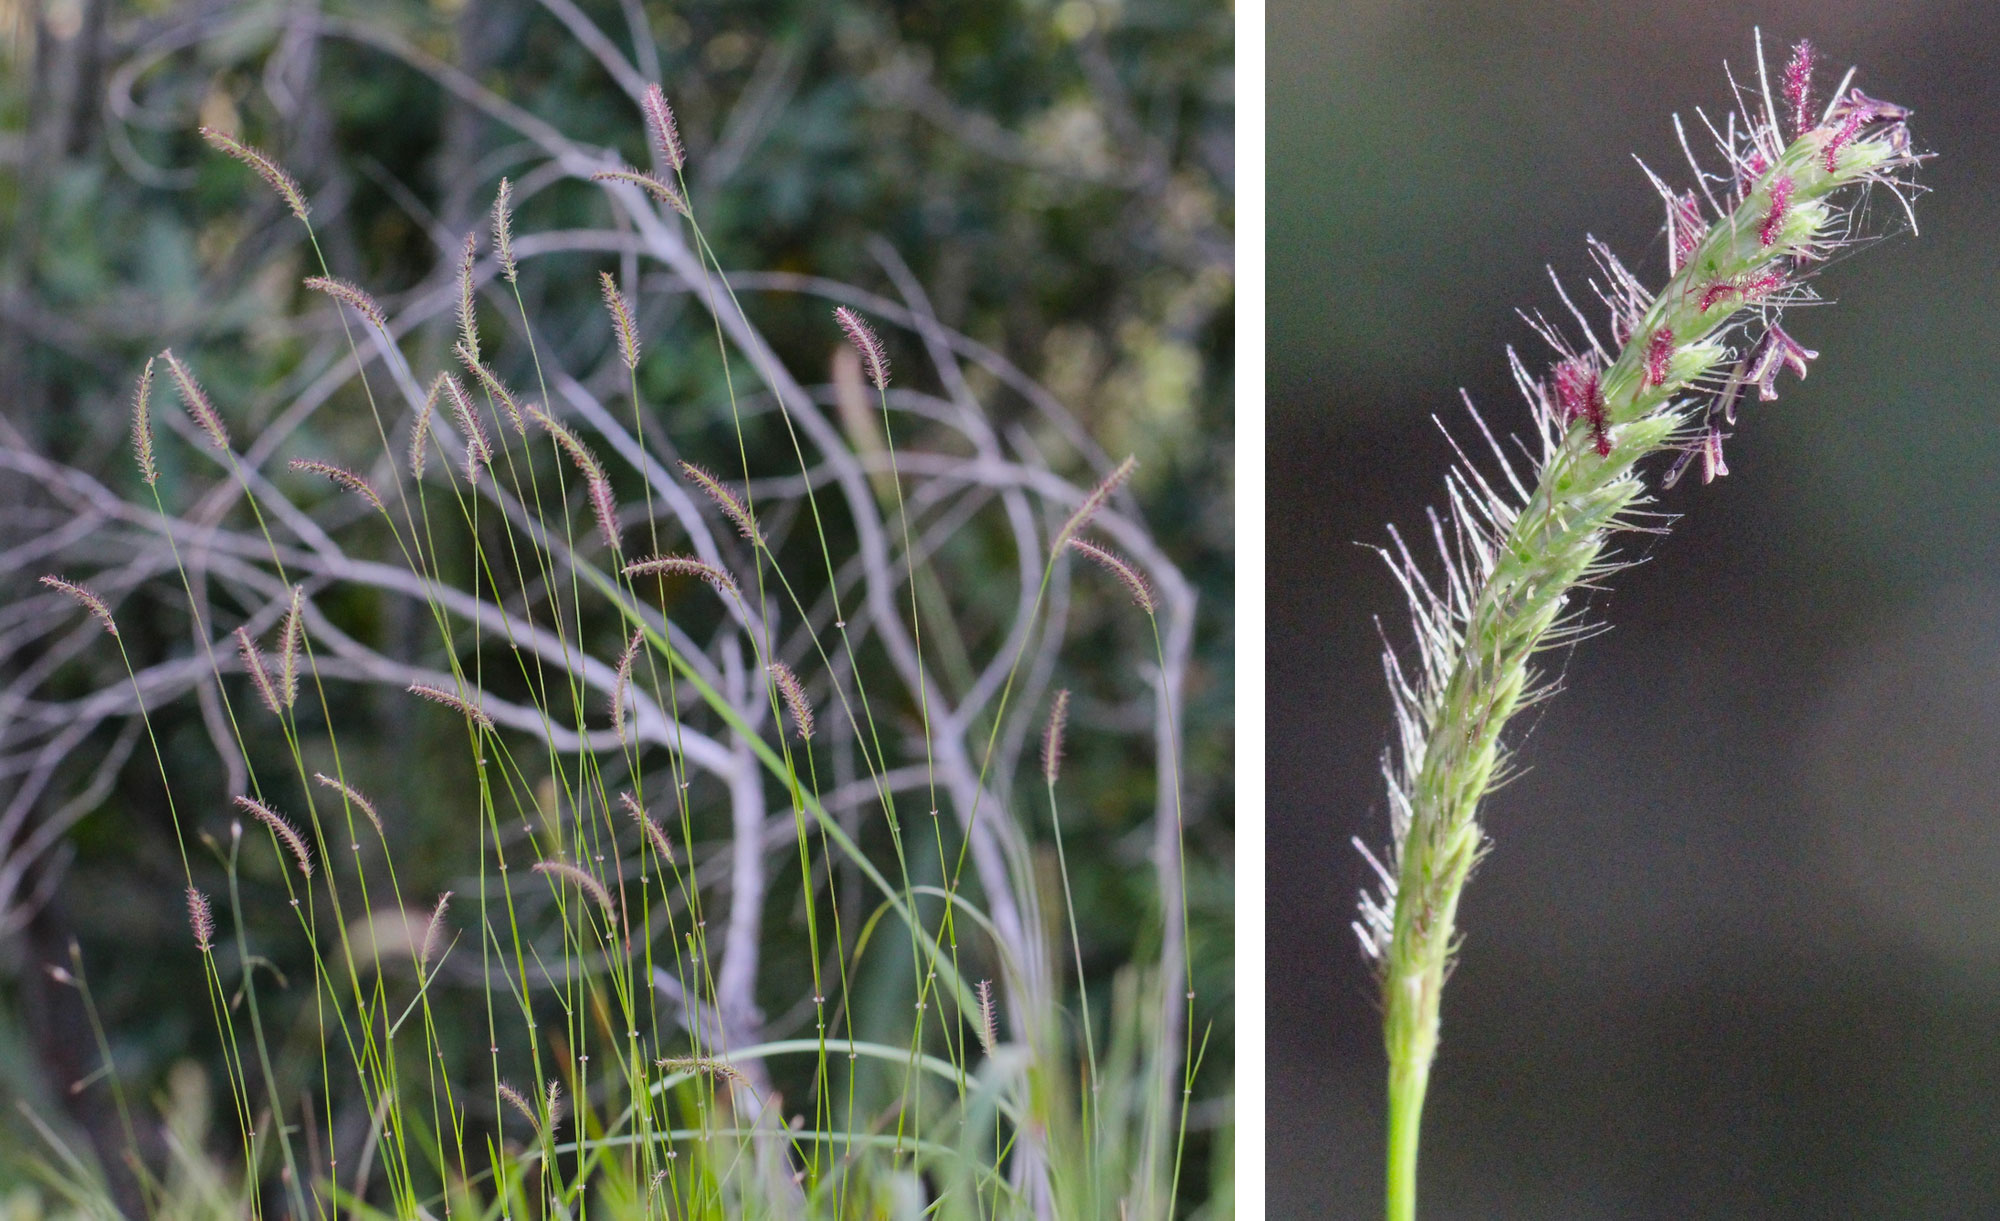 2-panel image showing photos of fringed centipede grass. Panel 1: Image of grass culms bearing apical inflorescences. Panel 2: Close-up of an inflorescence. The inflorescence has white hairs and pinkish-purple stigmas and stamens protruding.